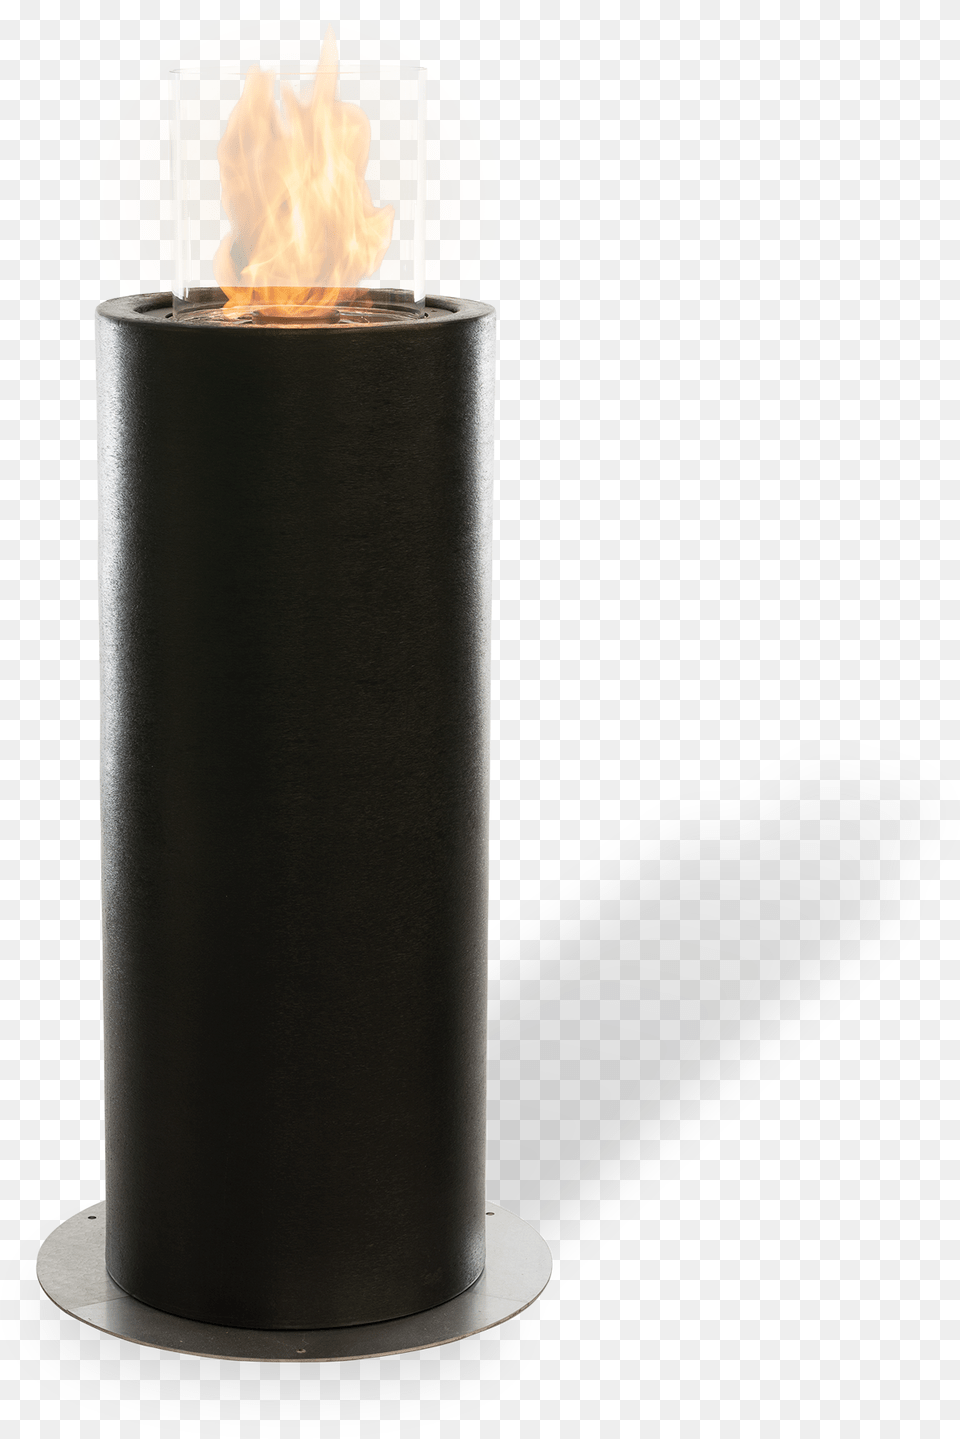 Flame, Candle, Light Free Transparent Png